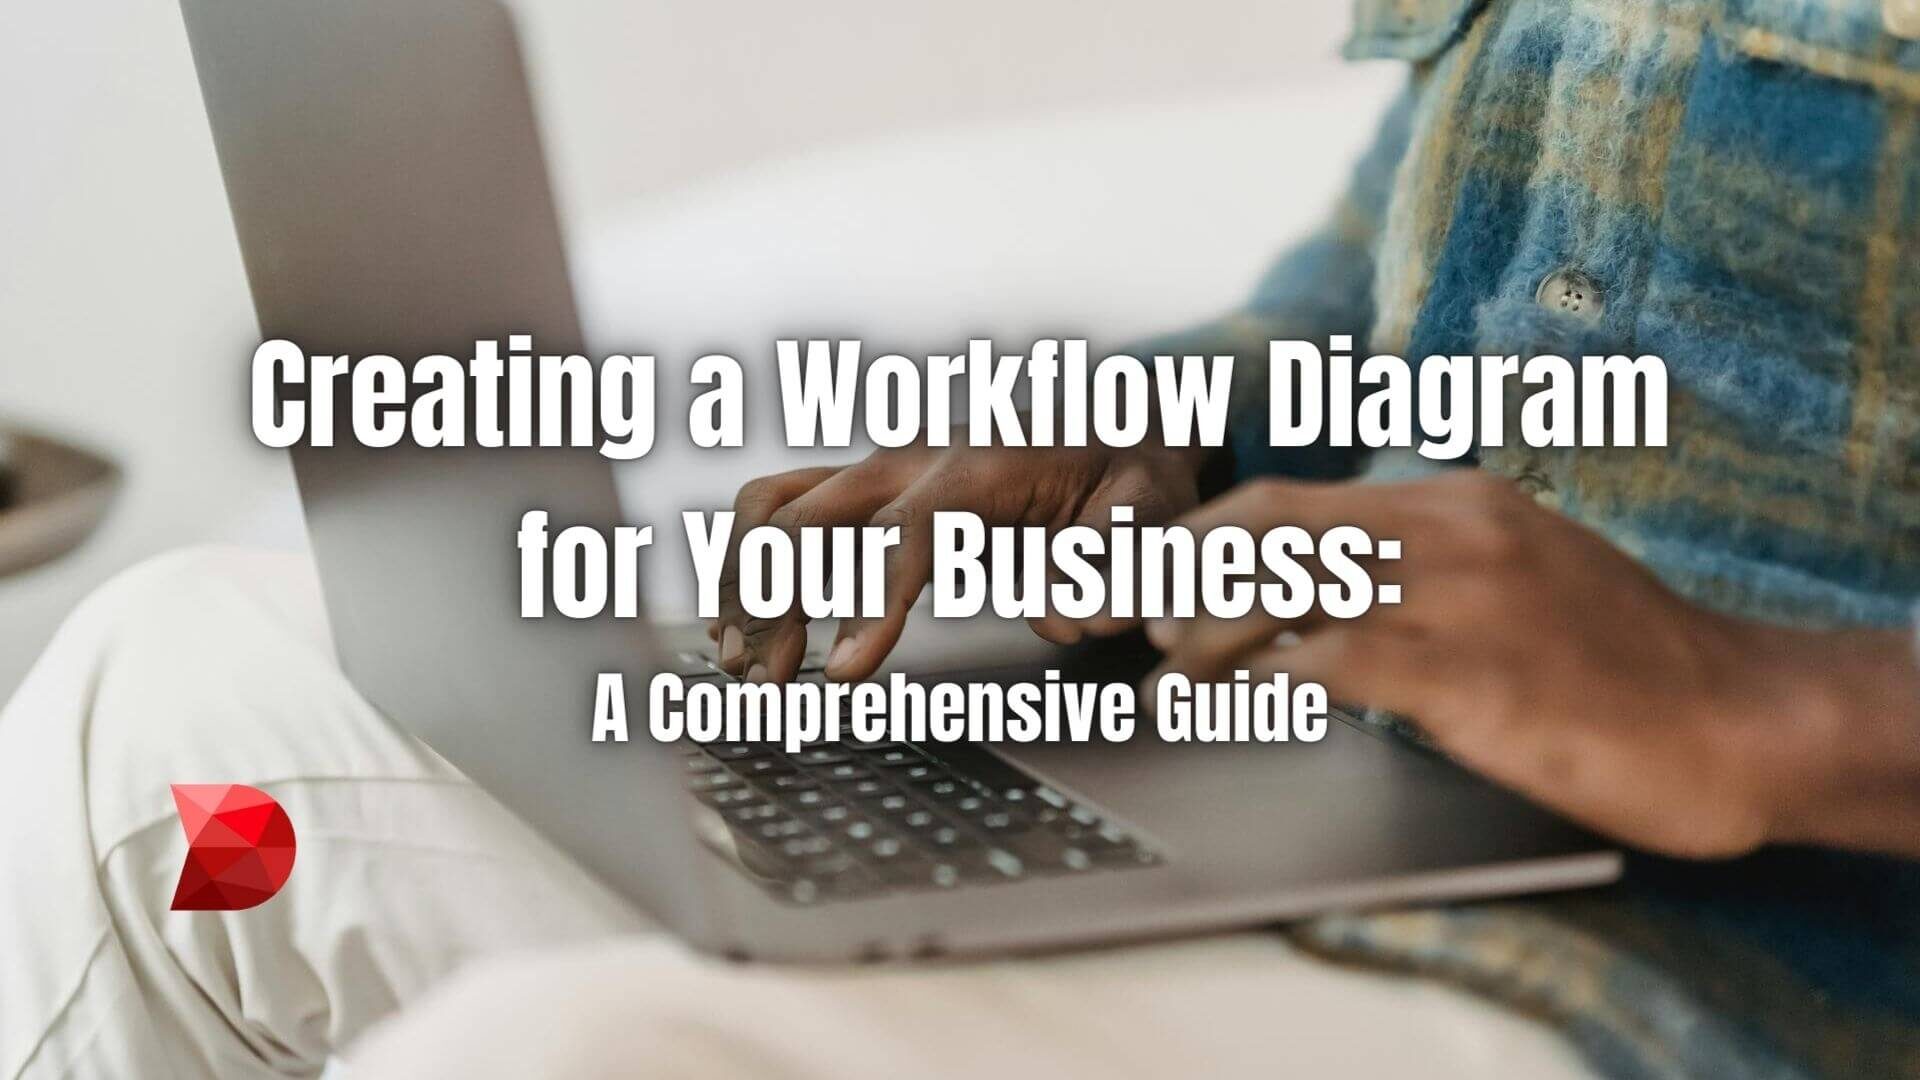 Streamline processes and boost productivity today! Unlock efficiency with our guide to crafting workflow diagrams for business success.